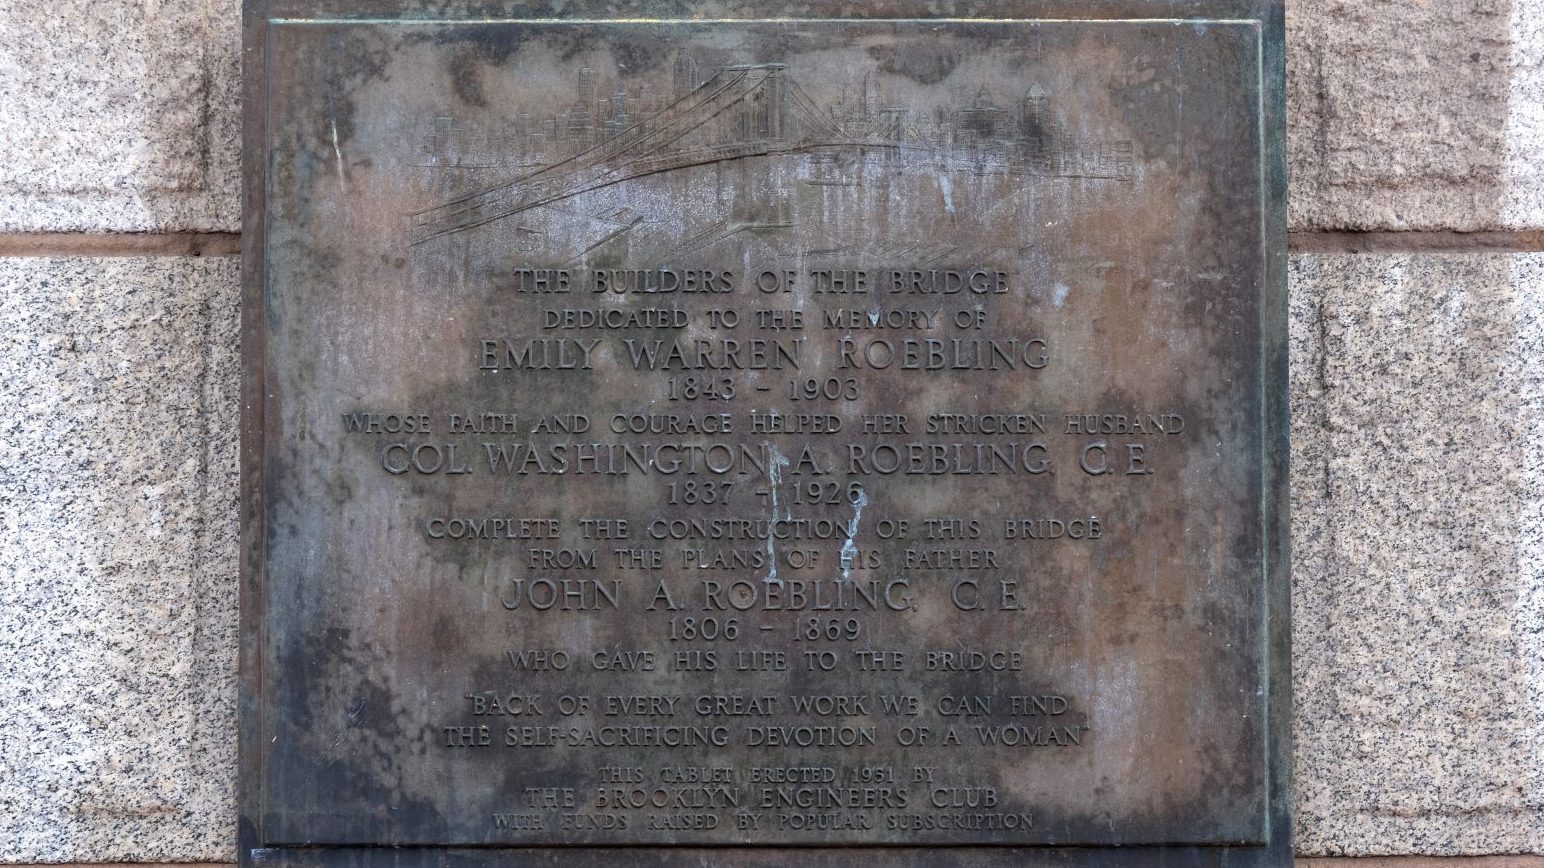 Metal plaque that reads "The Builders of the Bridge—Dedicated to the memory of Emily Warren Roebling."